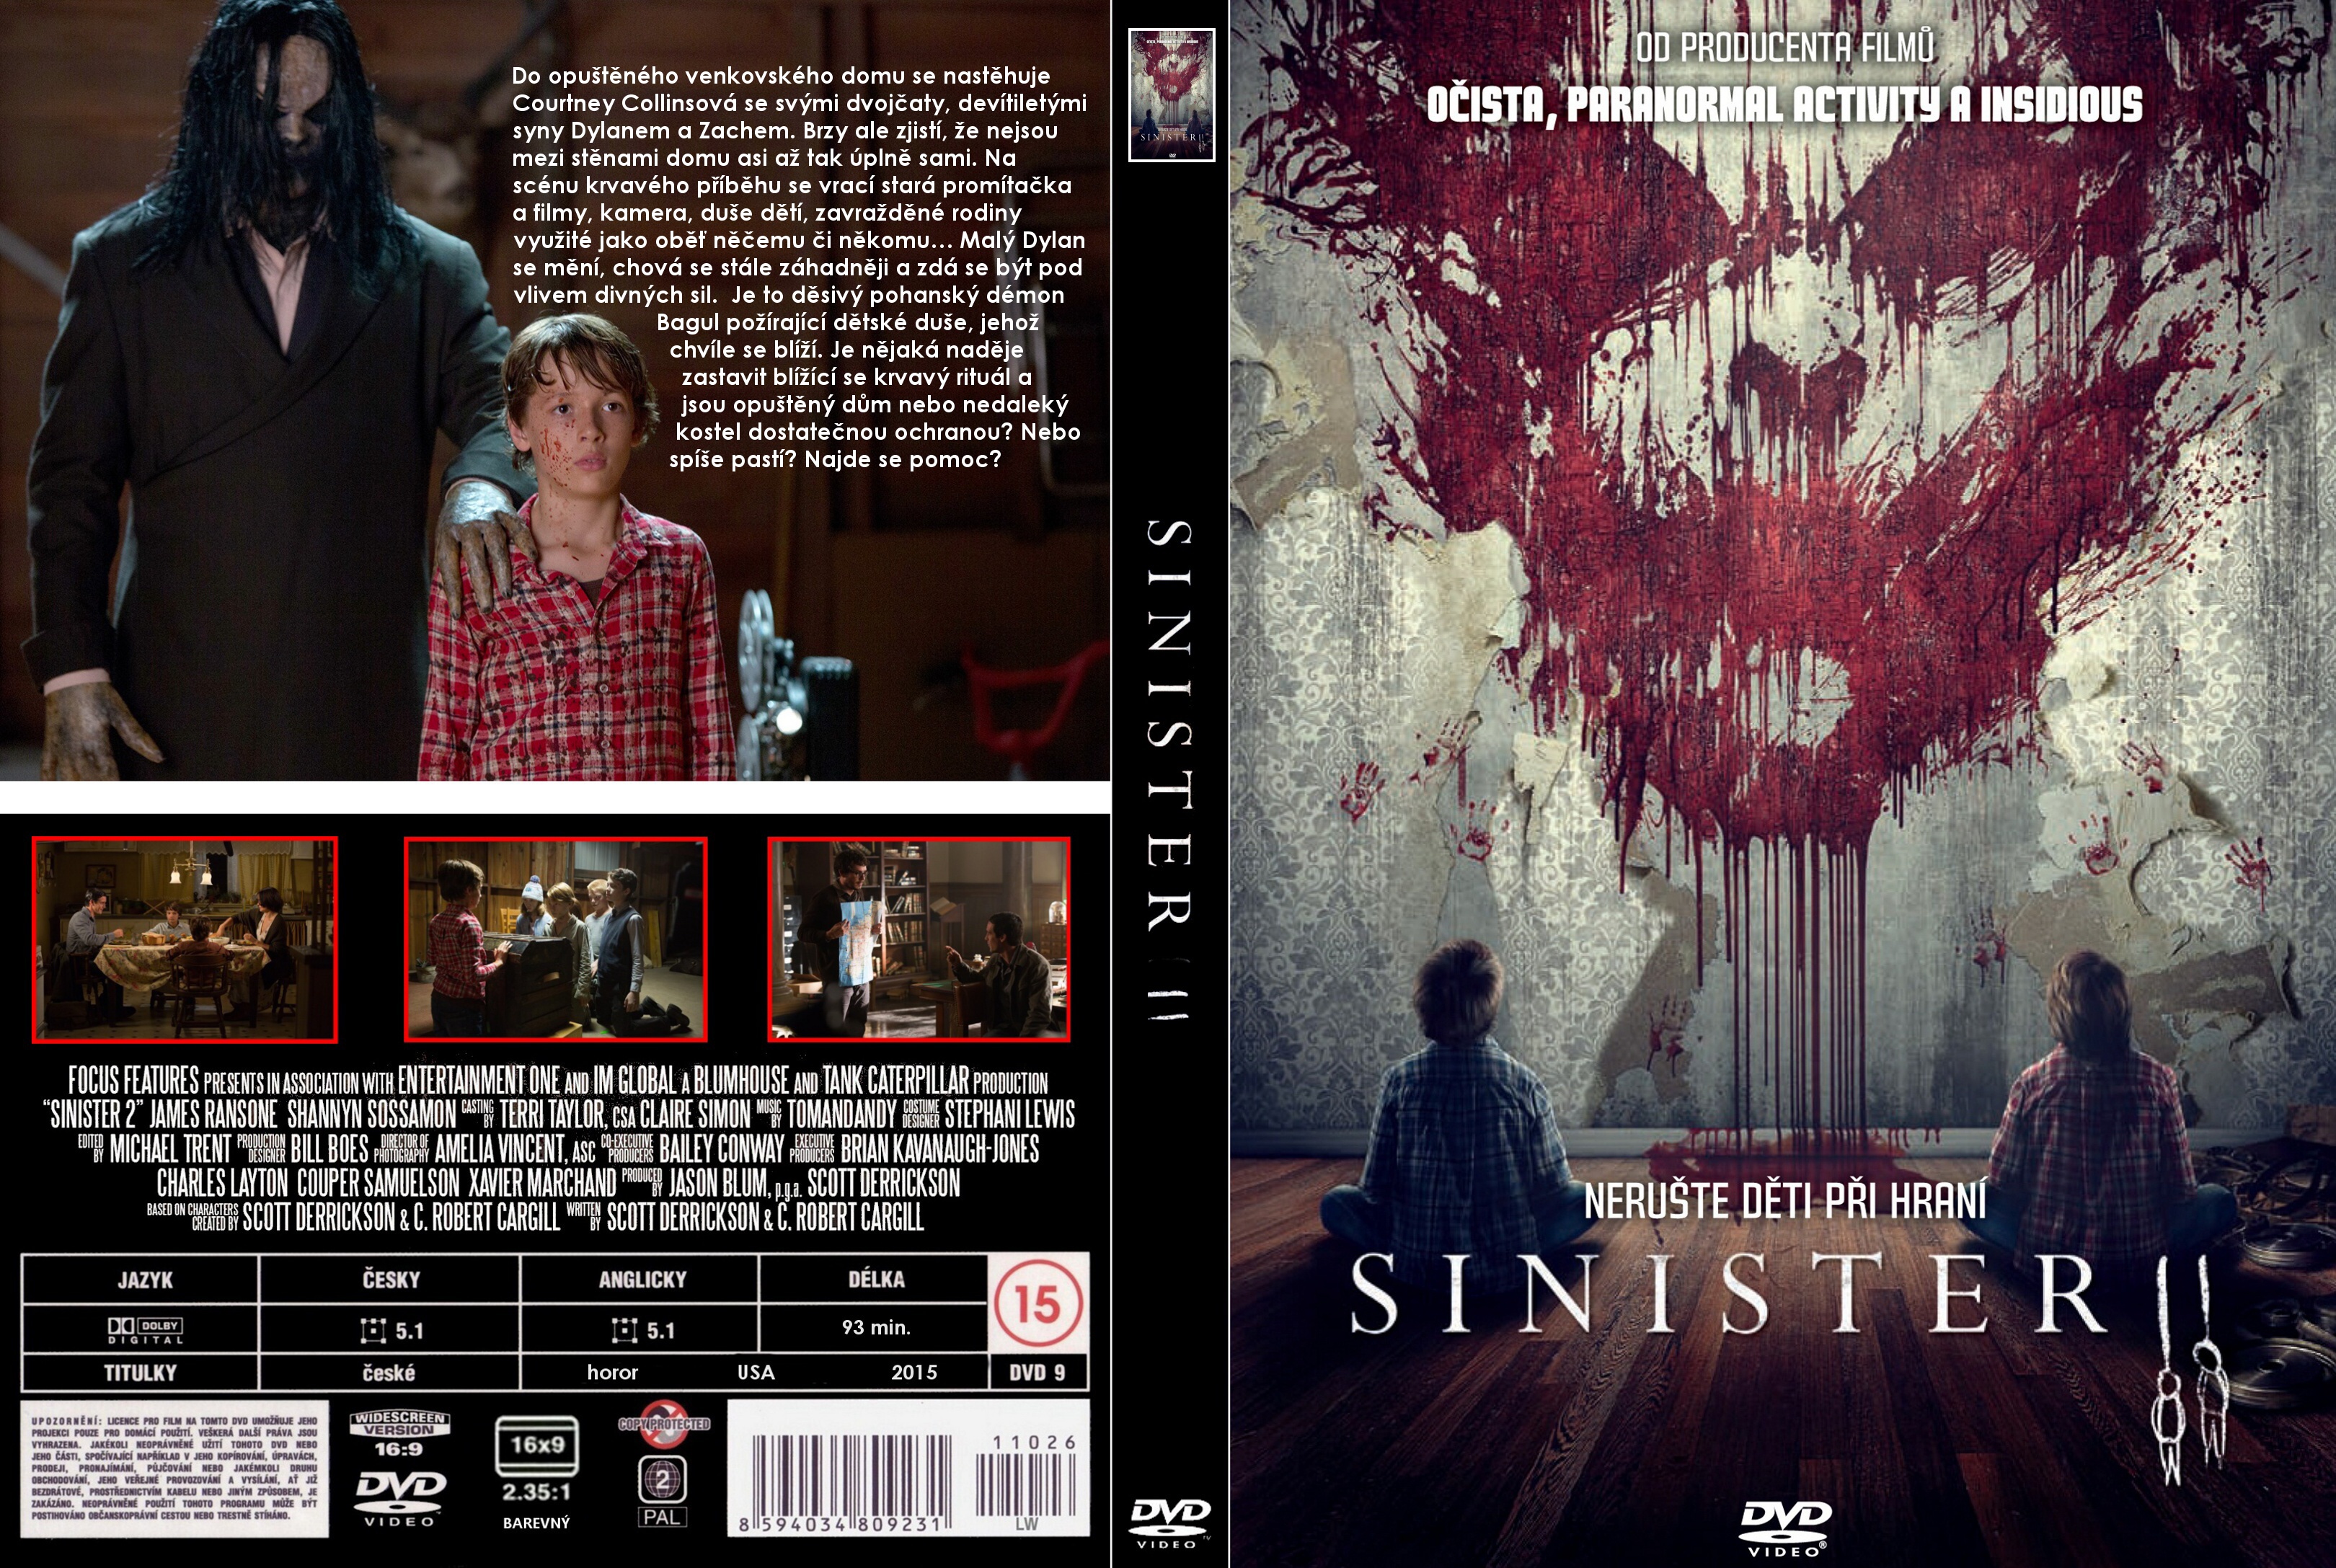 Bloom plejeforældre Nysgerrighed COVERS.BOX.SK ::: Sinister 2 (2015) - high quality DVD / Blueray / Movie